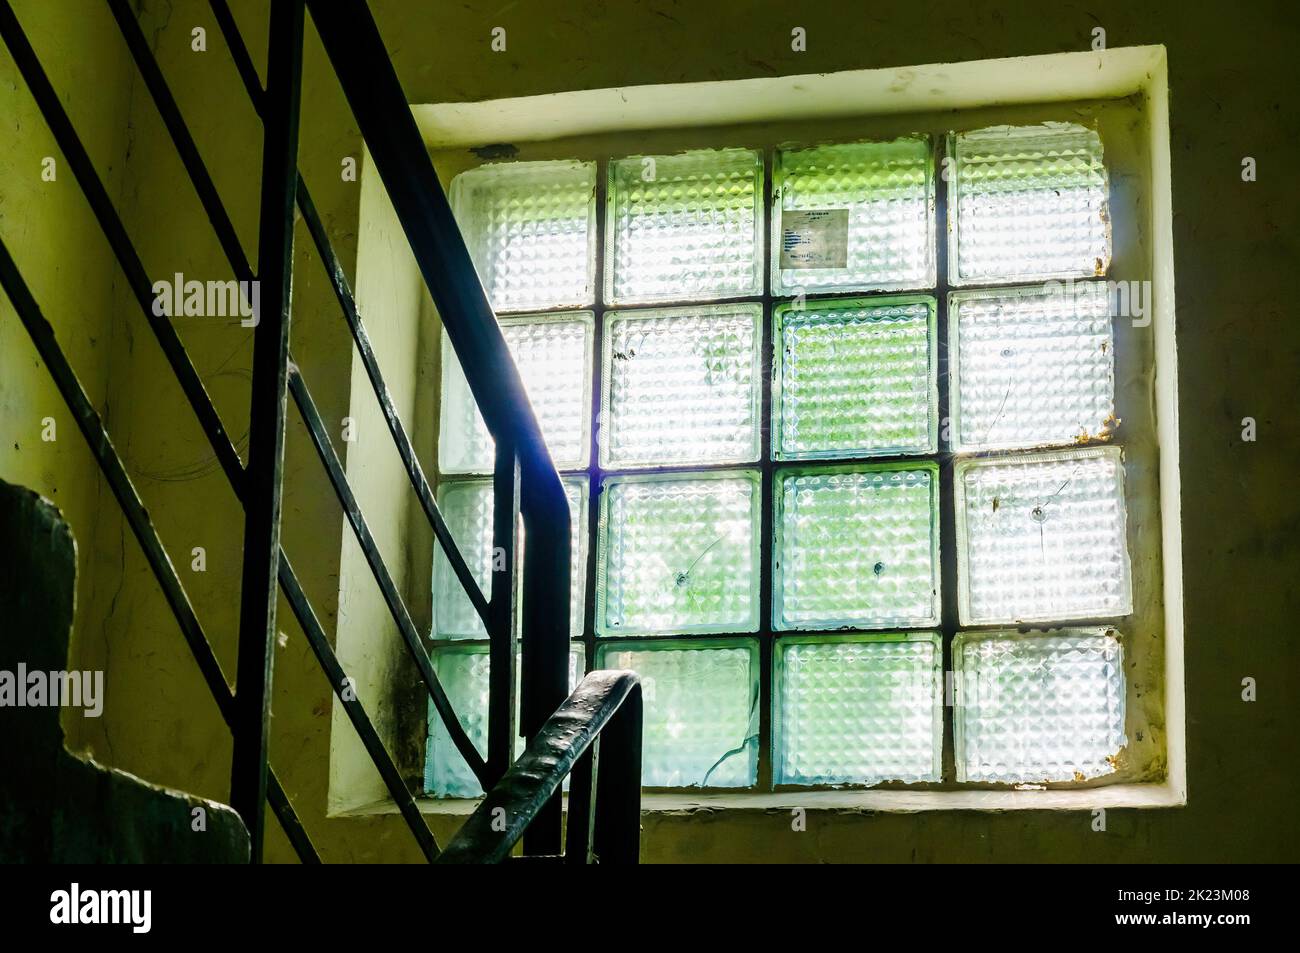 A staircase with a window in an old soviet building in Kiev, Ukraine Stock Photo